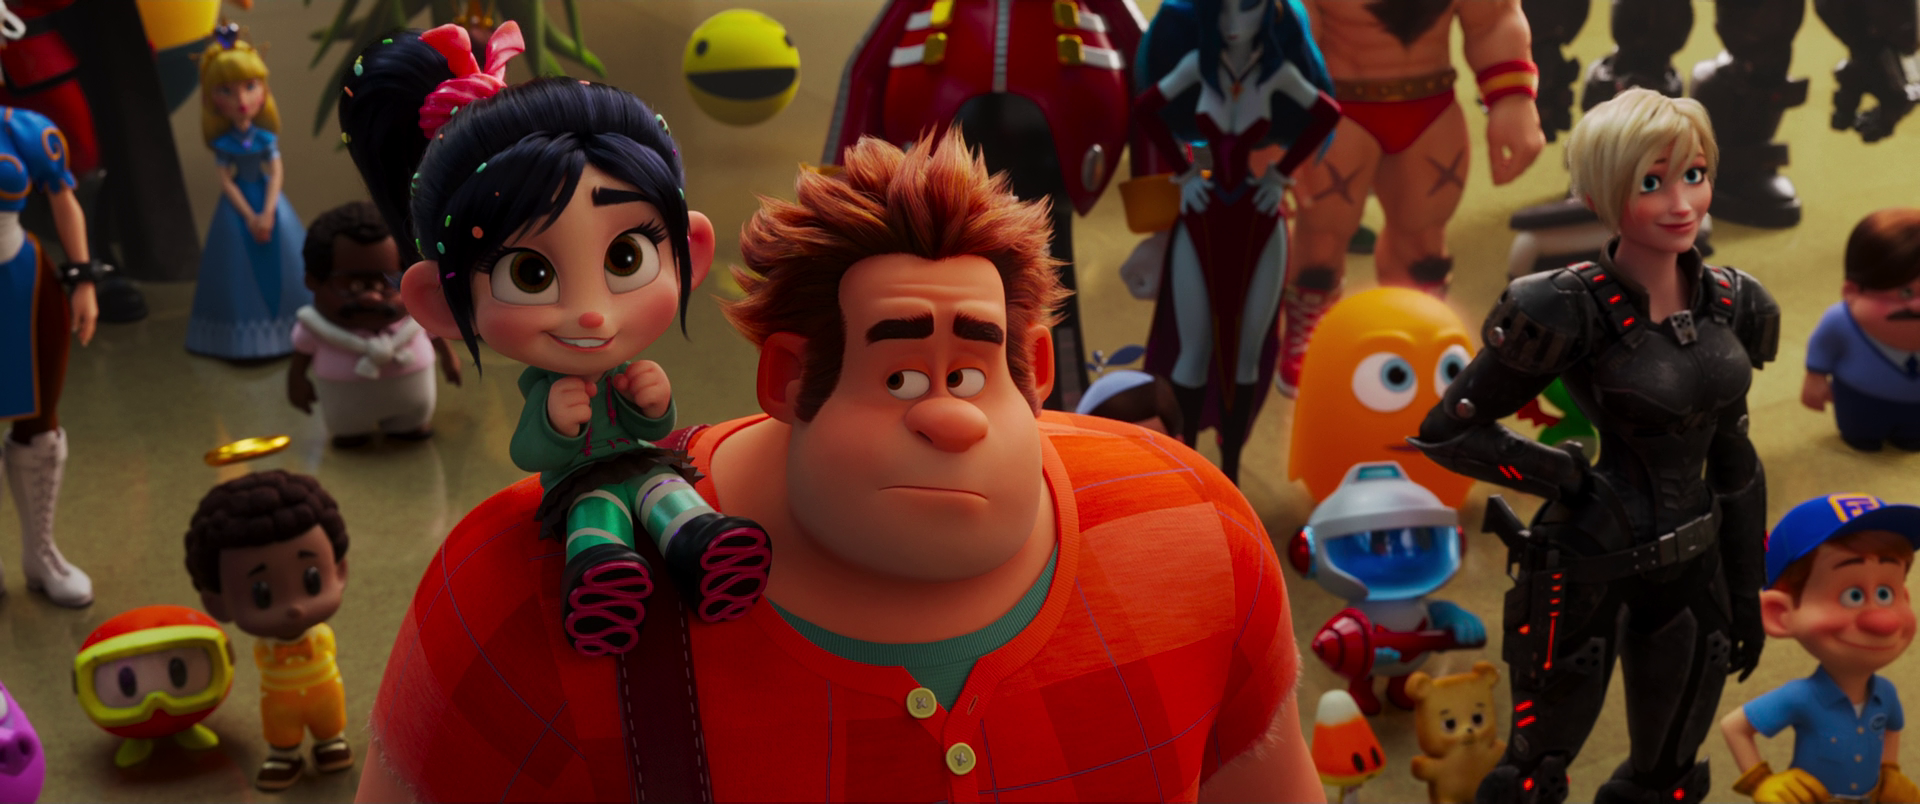 When it comes to ralph breaks the internet, john c. Ralph breaks the intern...